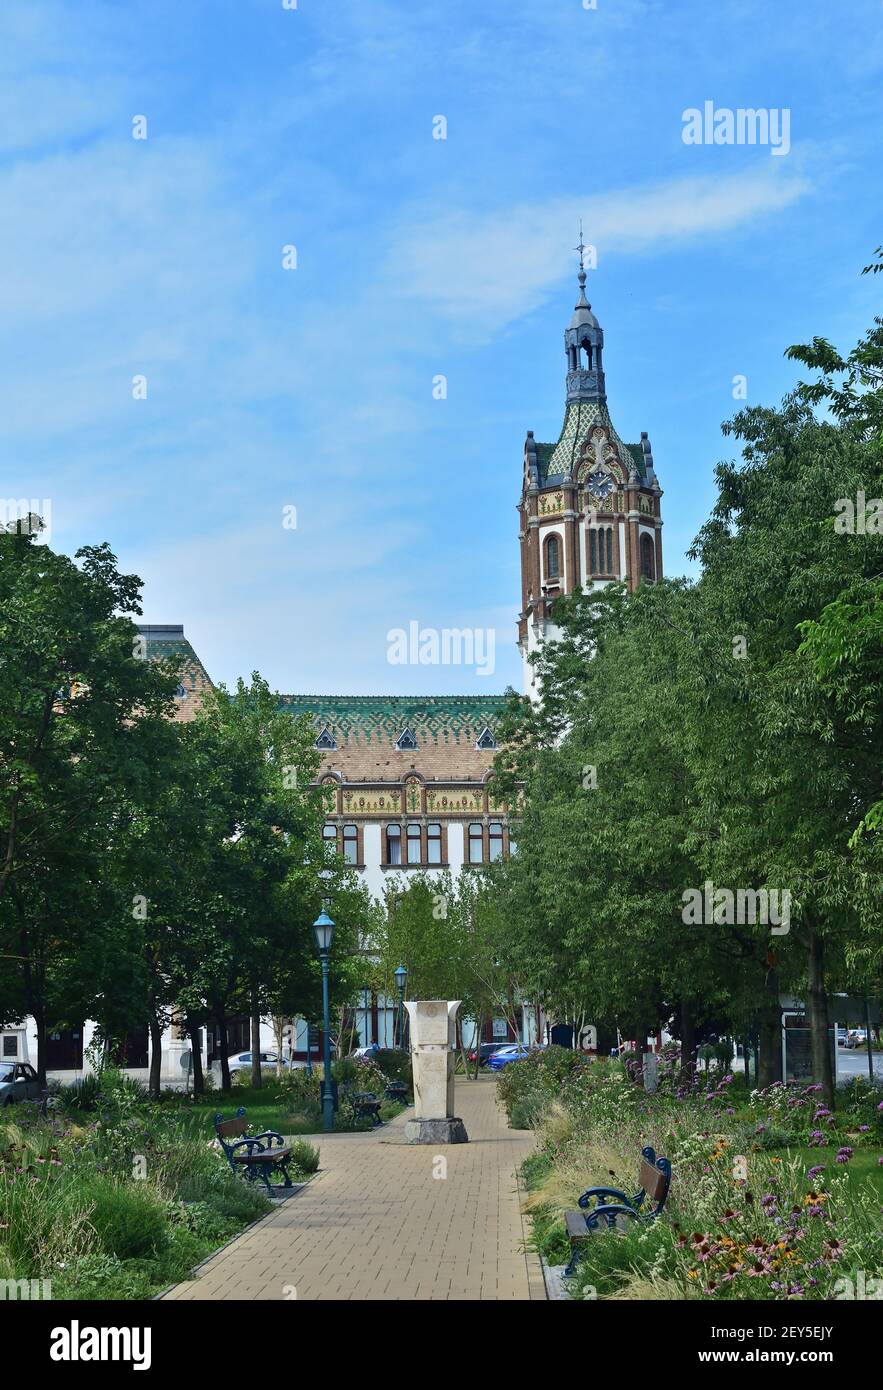 Iconic art nouveau Town Hall in Kiskunfelegyhaza, Hungary with park and trees Stock Photo